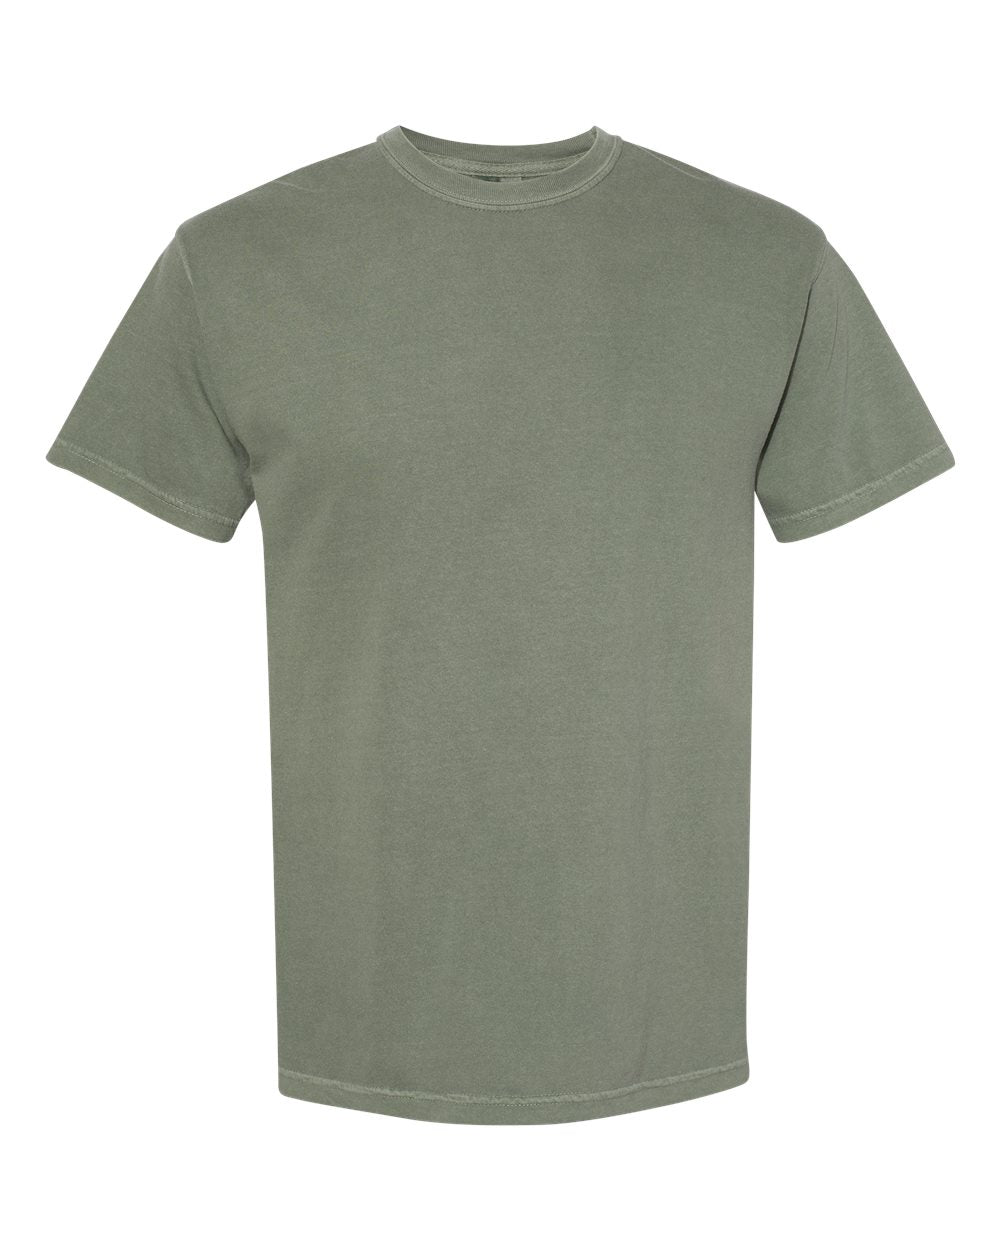 Comfort Colors Tee (No Pocket) - Kite and Crest